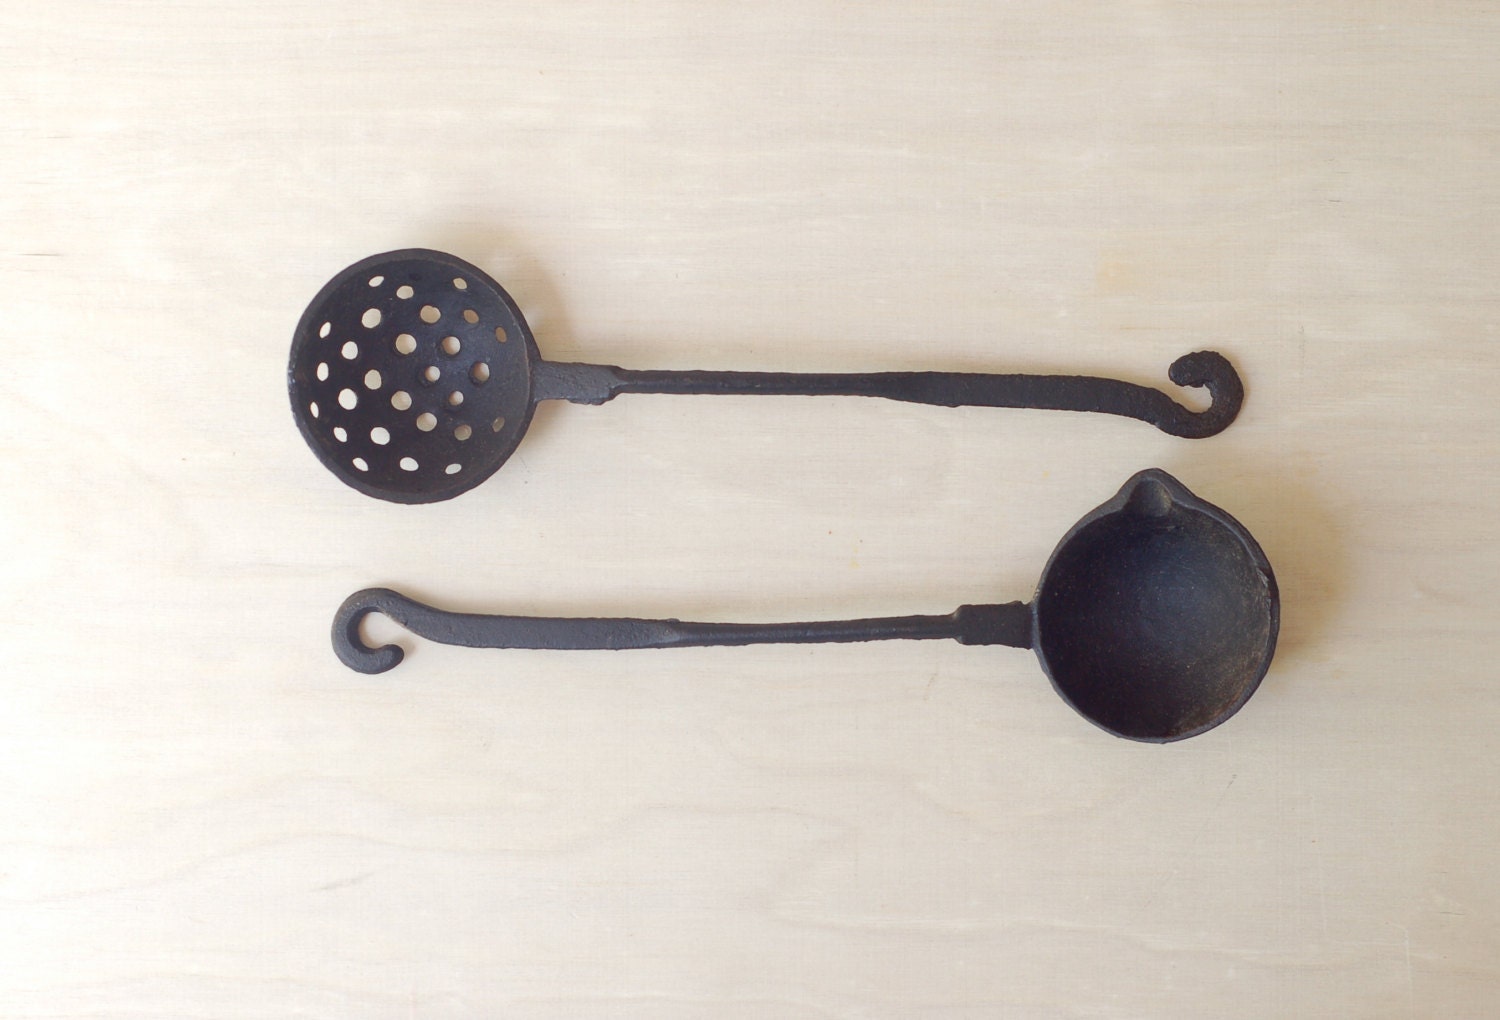 Vintage Cast Iron Utensils- metal spoon and spoodle - Surfaced